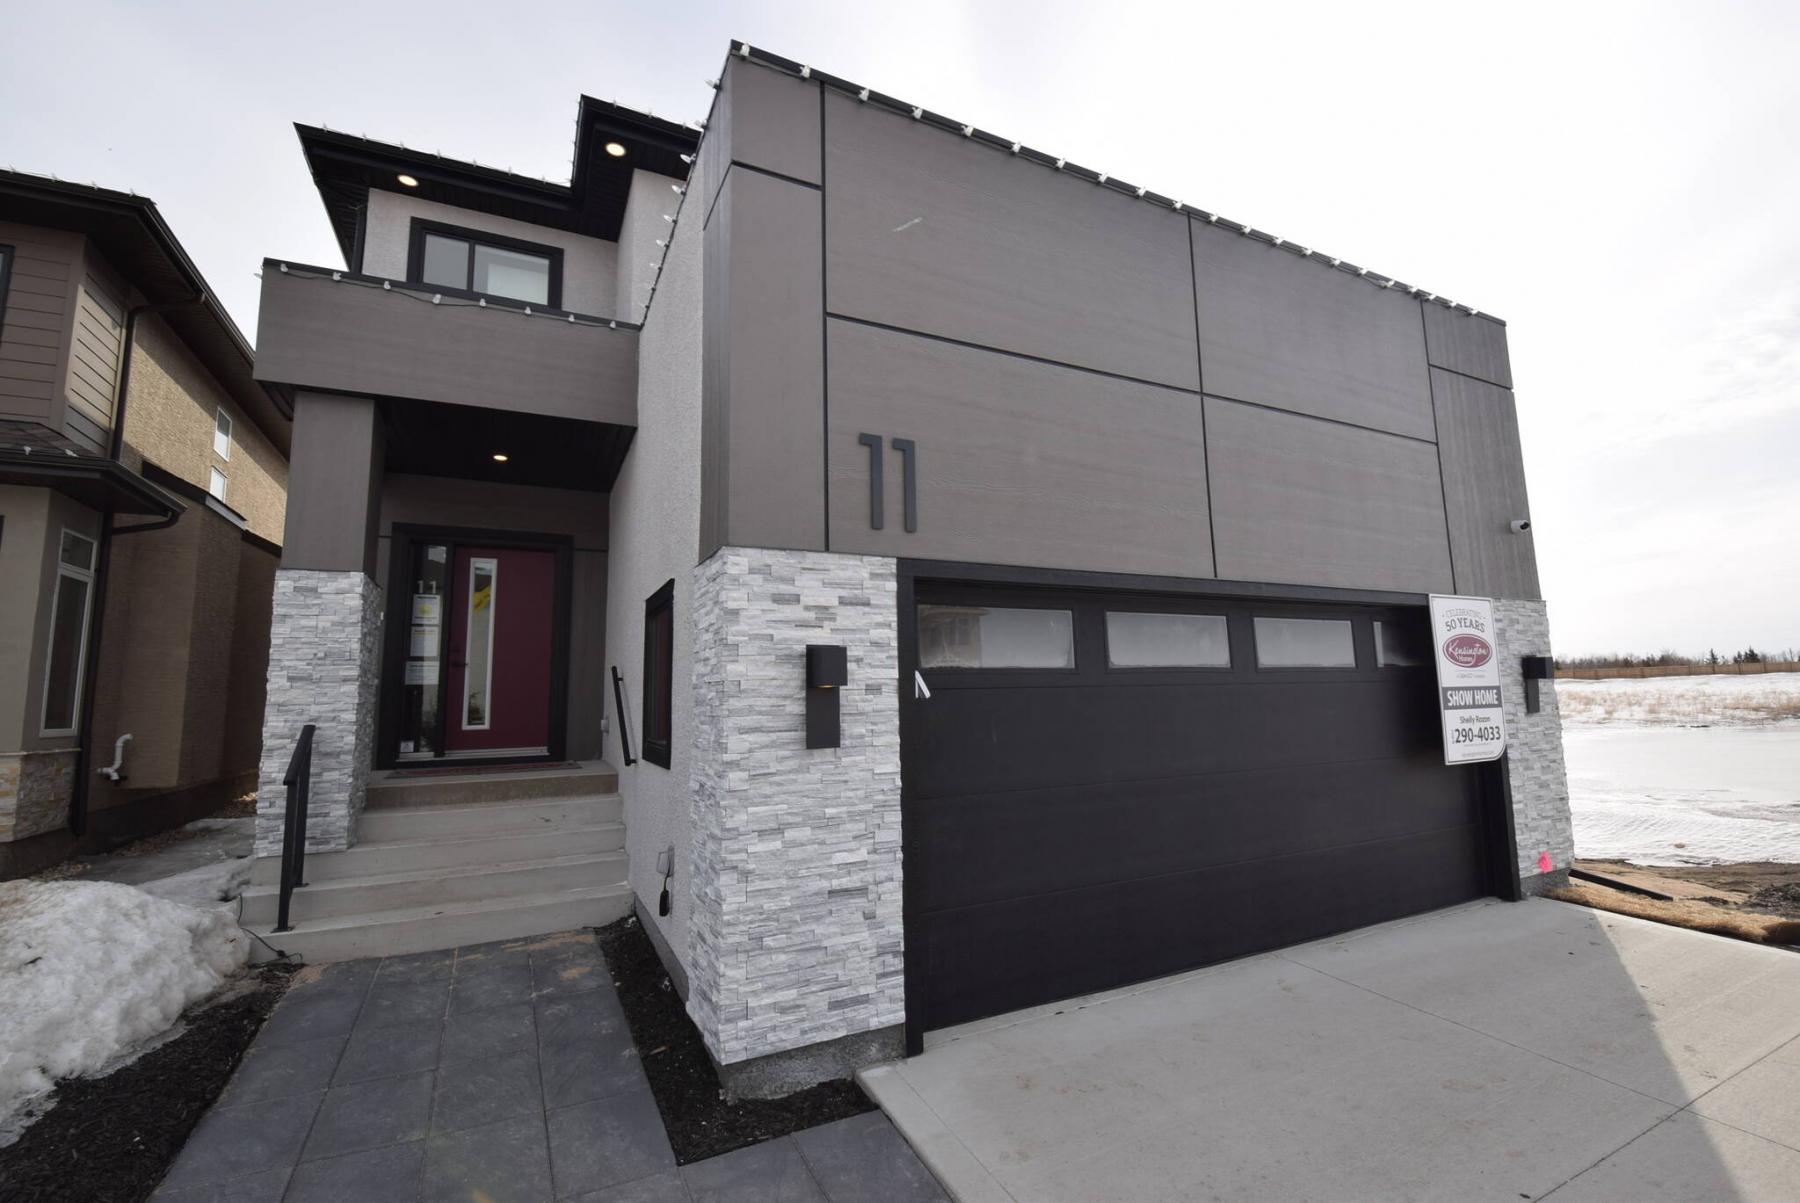 <p>Photos by Todd Lewys / Winnipeg Free Press </p><p>A modern, smart-looking exterior serves as a preview to the Ridgefield&rsquo;s well-thought-out interior design, which deftly combines function and elegance.</p>